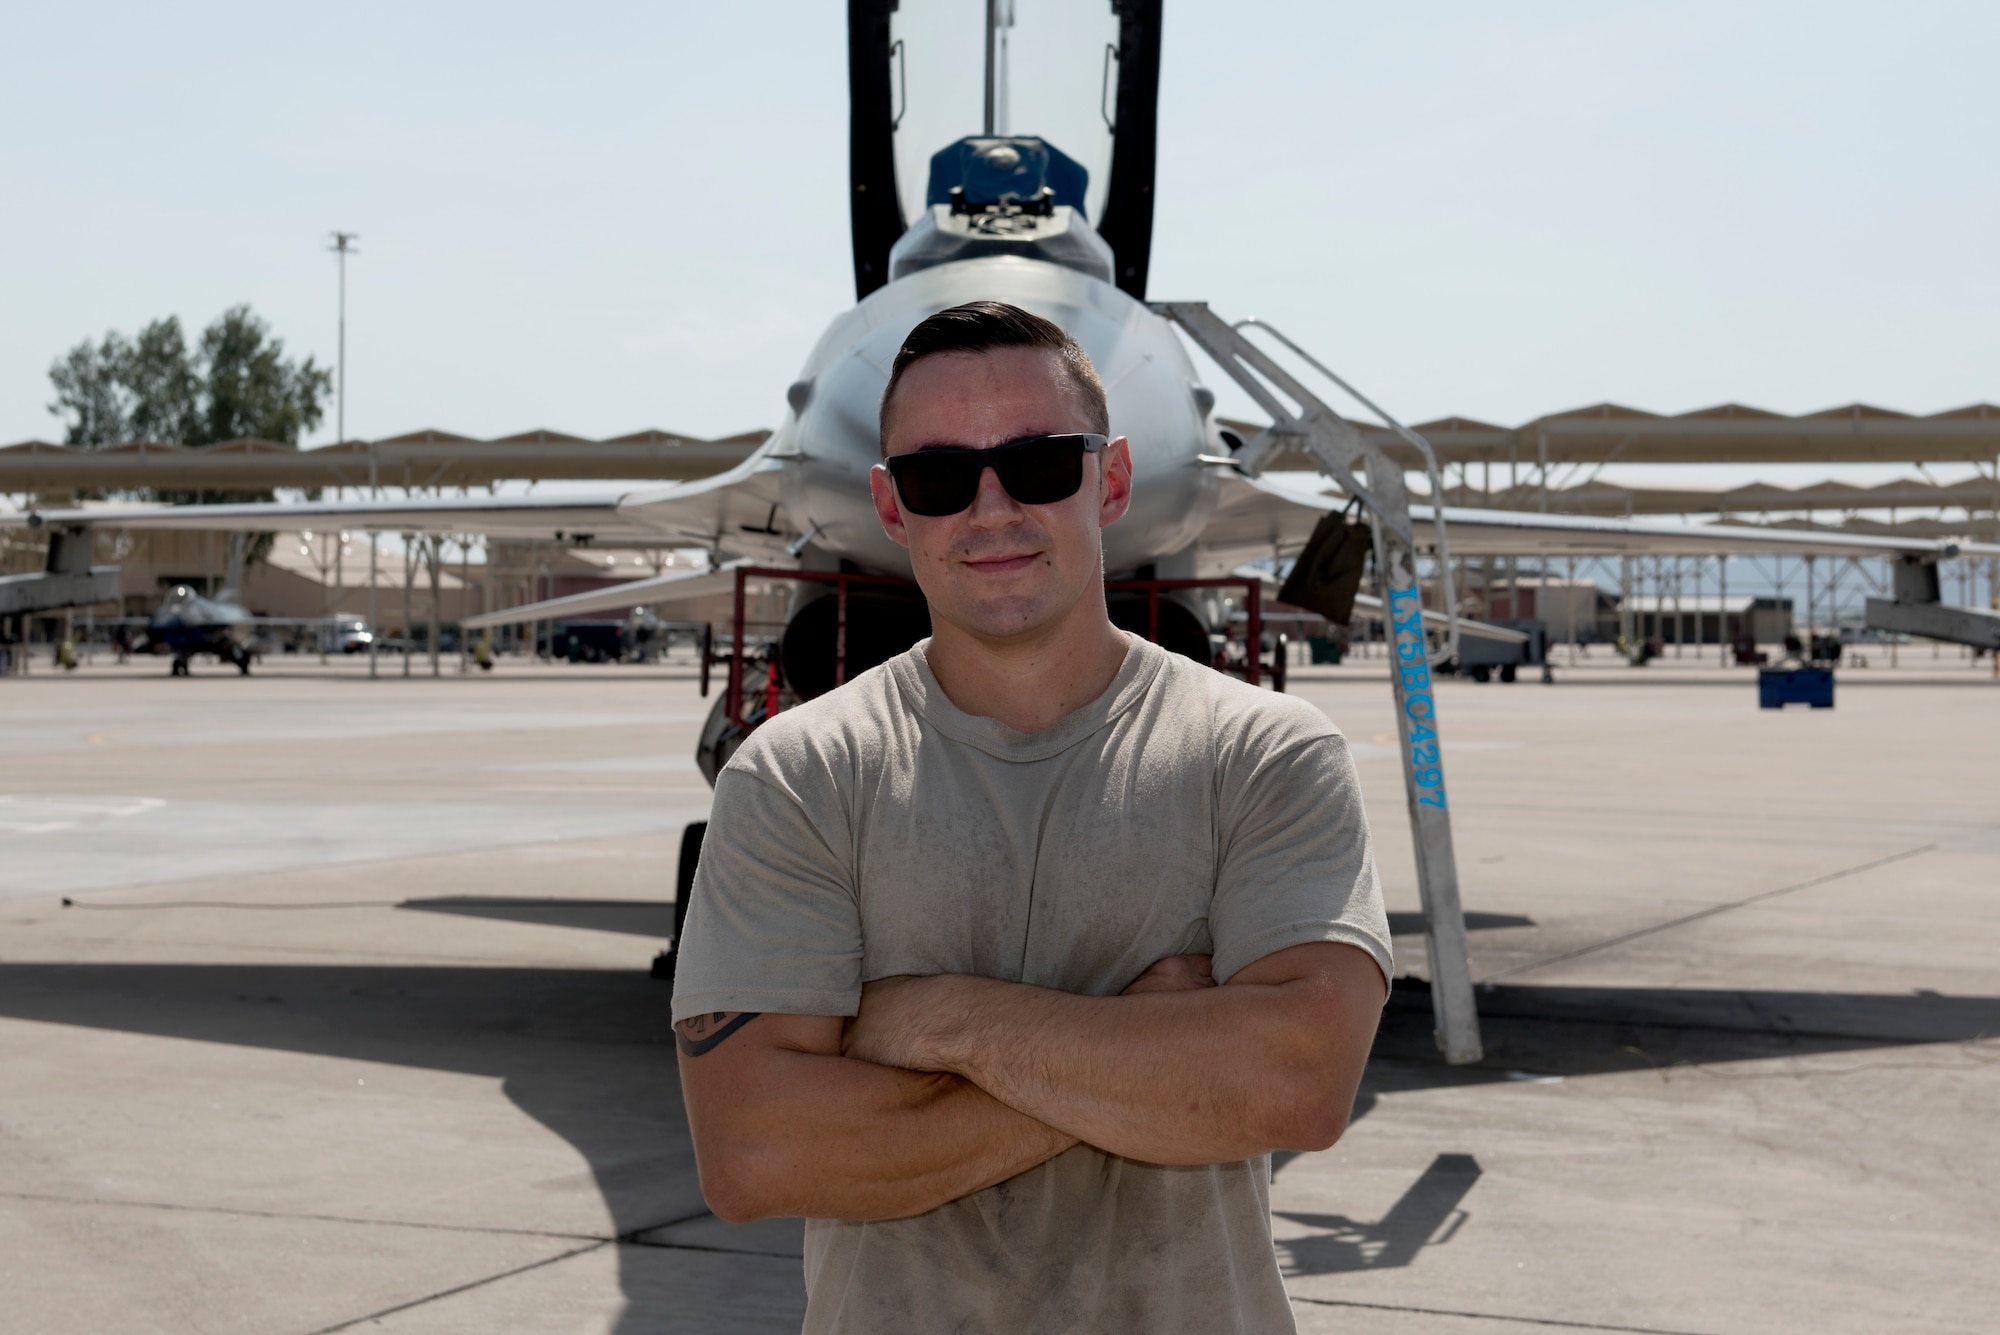 Staff Sgt. Tanner Apple, 309th Aircraft Maintenance Unit dedicated crew chief, poses for a photograph Aug. 20, 2018, at Luke Air Force Base, Ariz. Apple was awarded the 2017 Thomas N. Barnes award for the best dedicated crew chief in the Air Force. (U.S. Air Force photo by Senior Airman Ridge Shan)